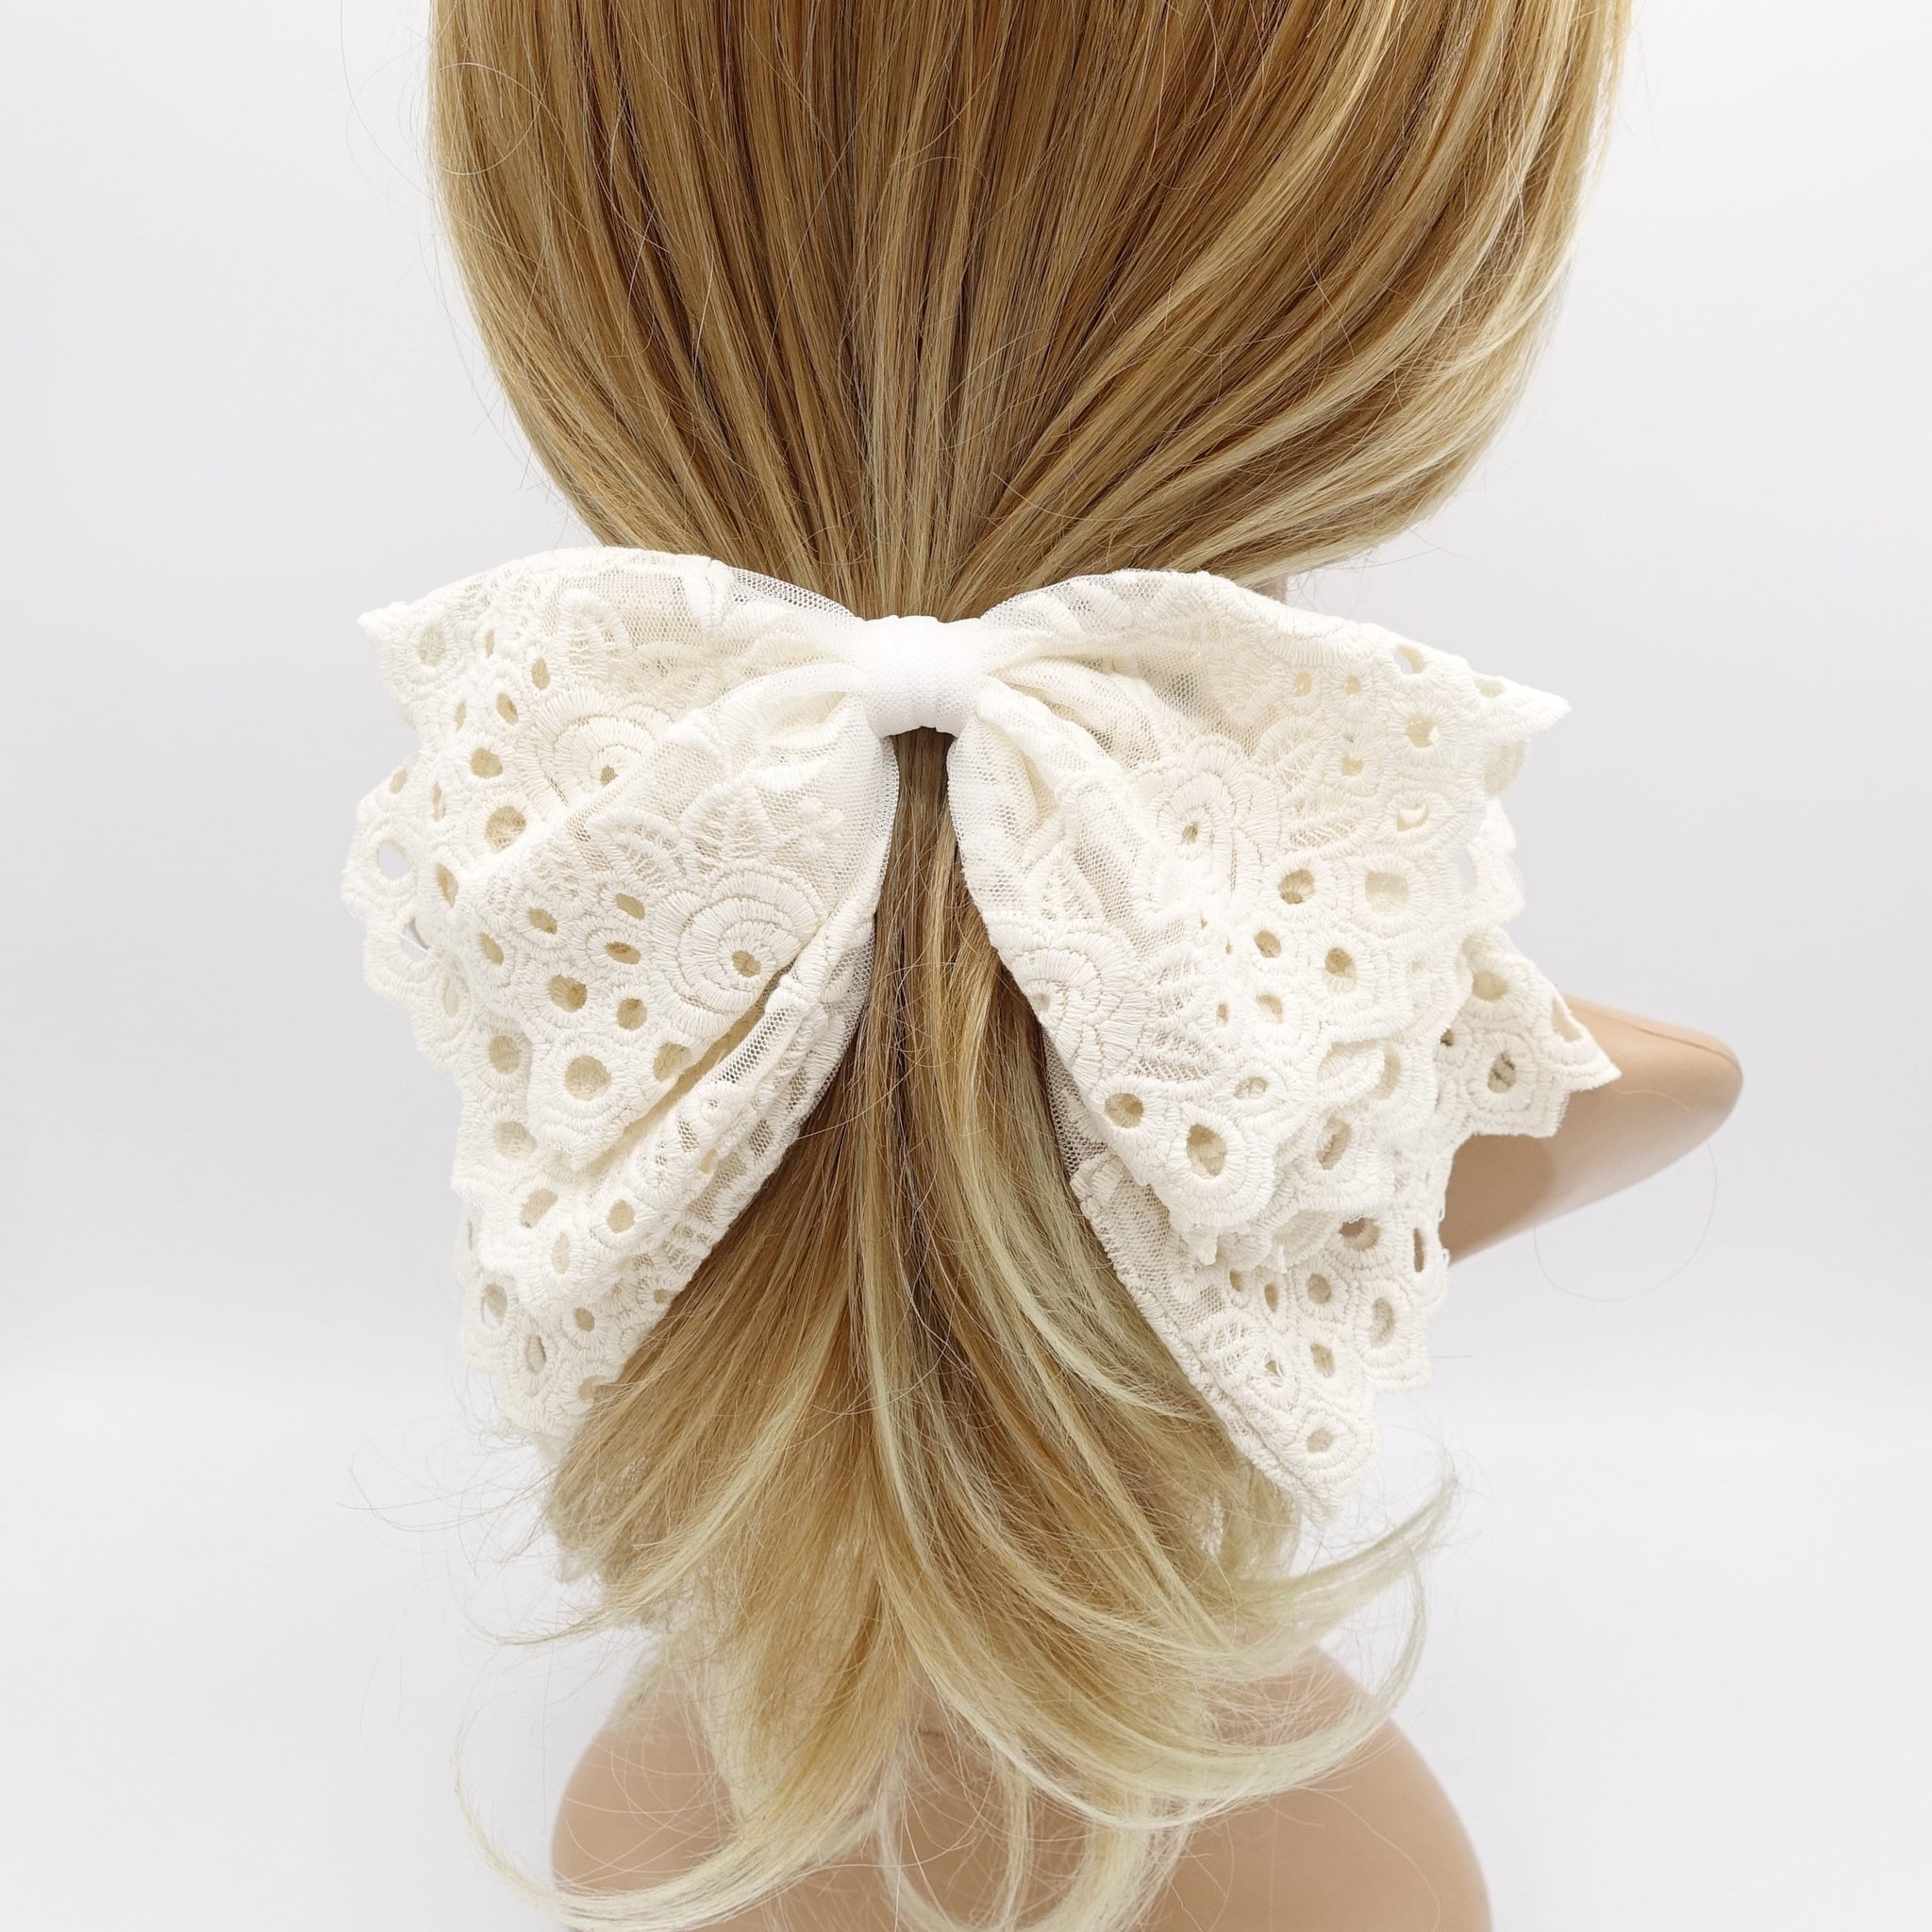 veryshine.com Barrette (Bow) Cream white lace hair bow, layered hair bow for women